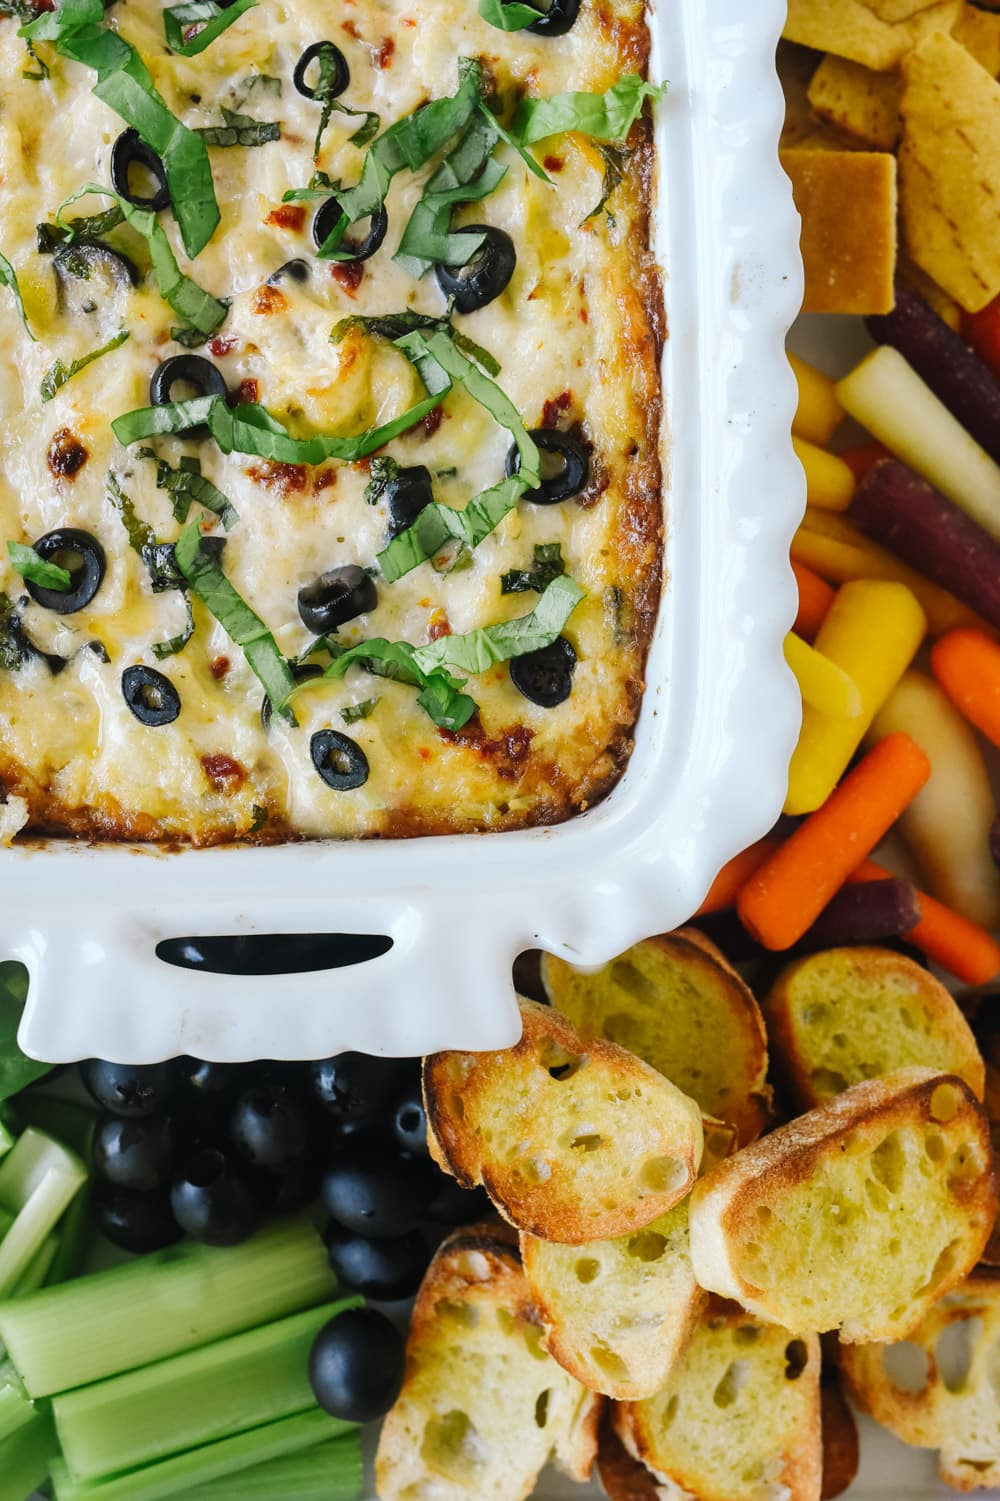 Hot Olive Artichoke Dip with bread